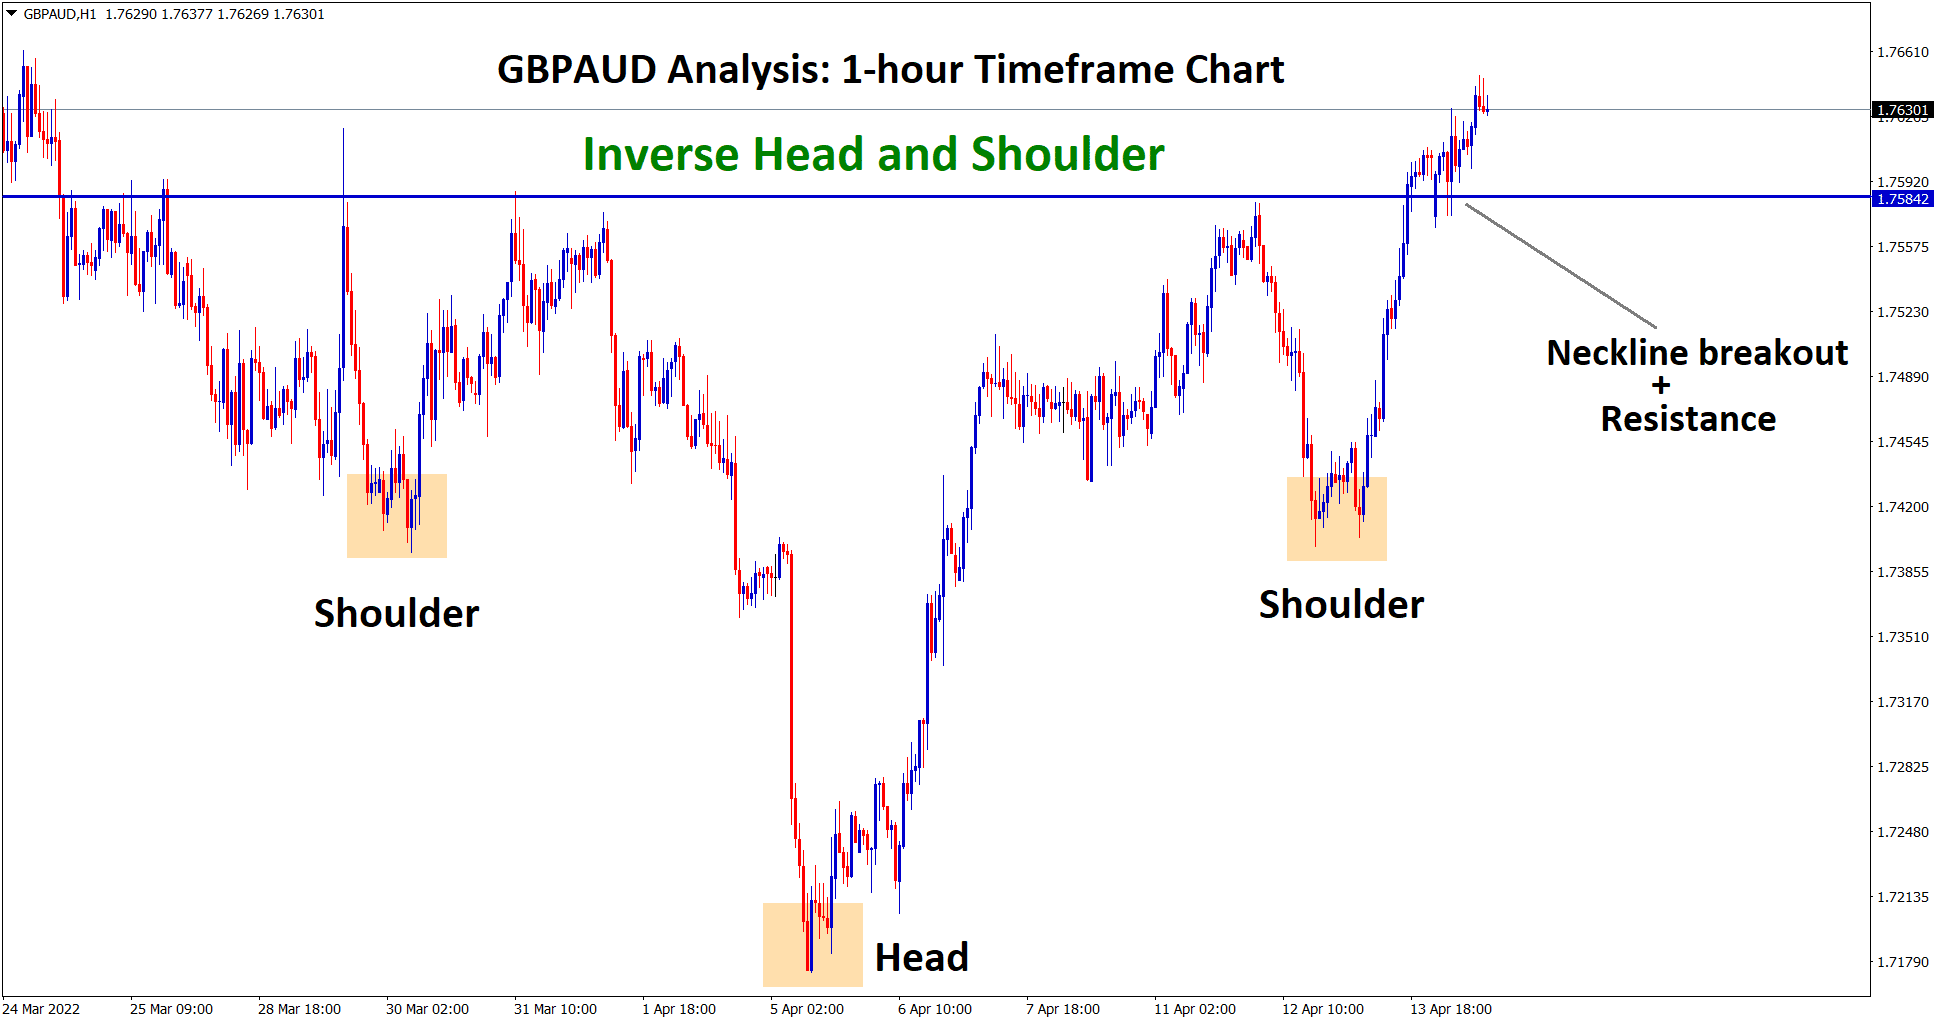 GBPAUD inverse head and shoulder and neckline breakout